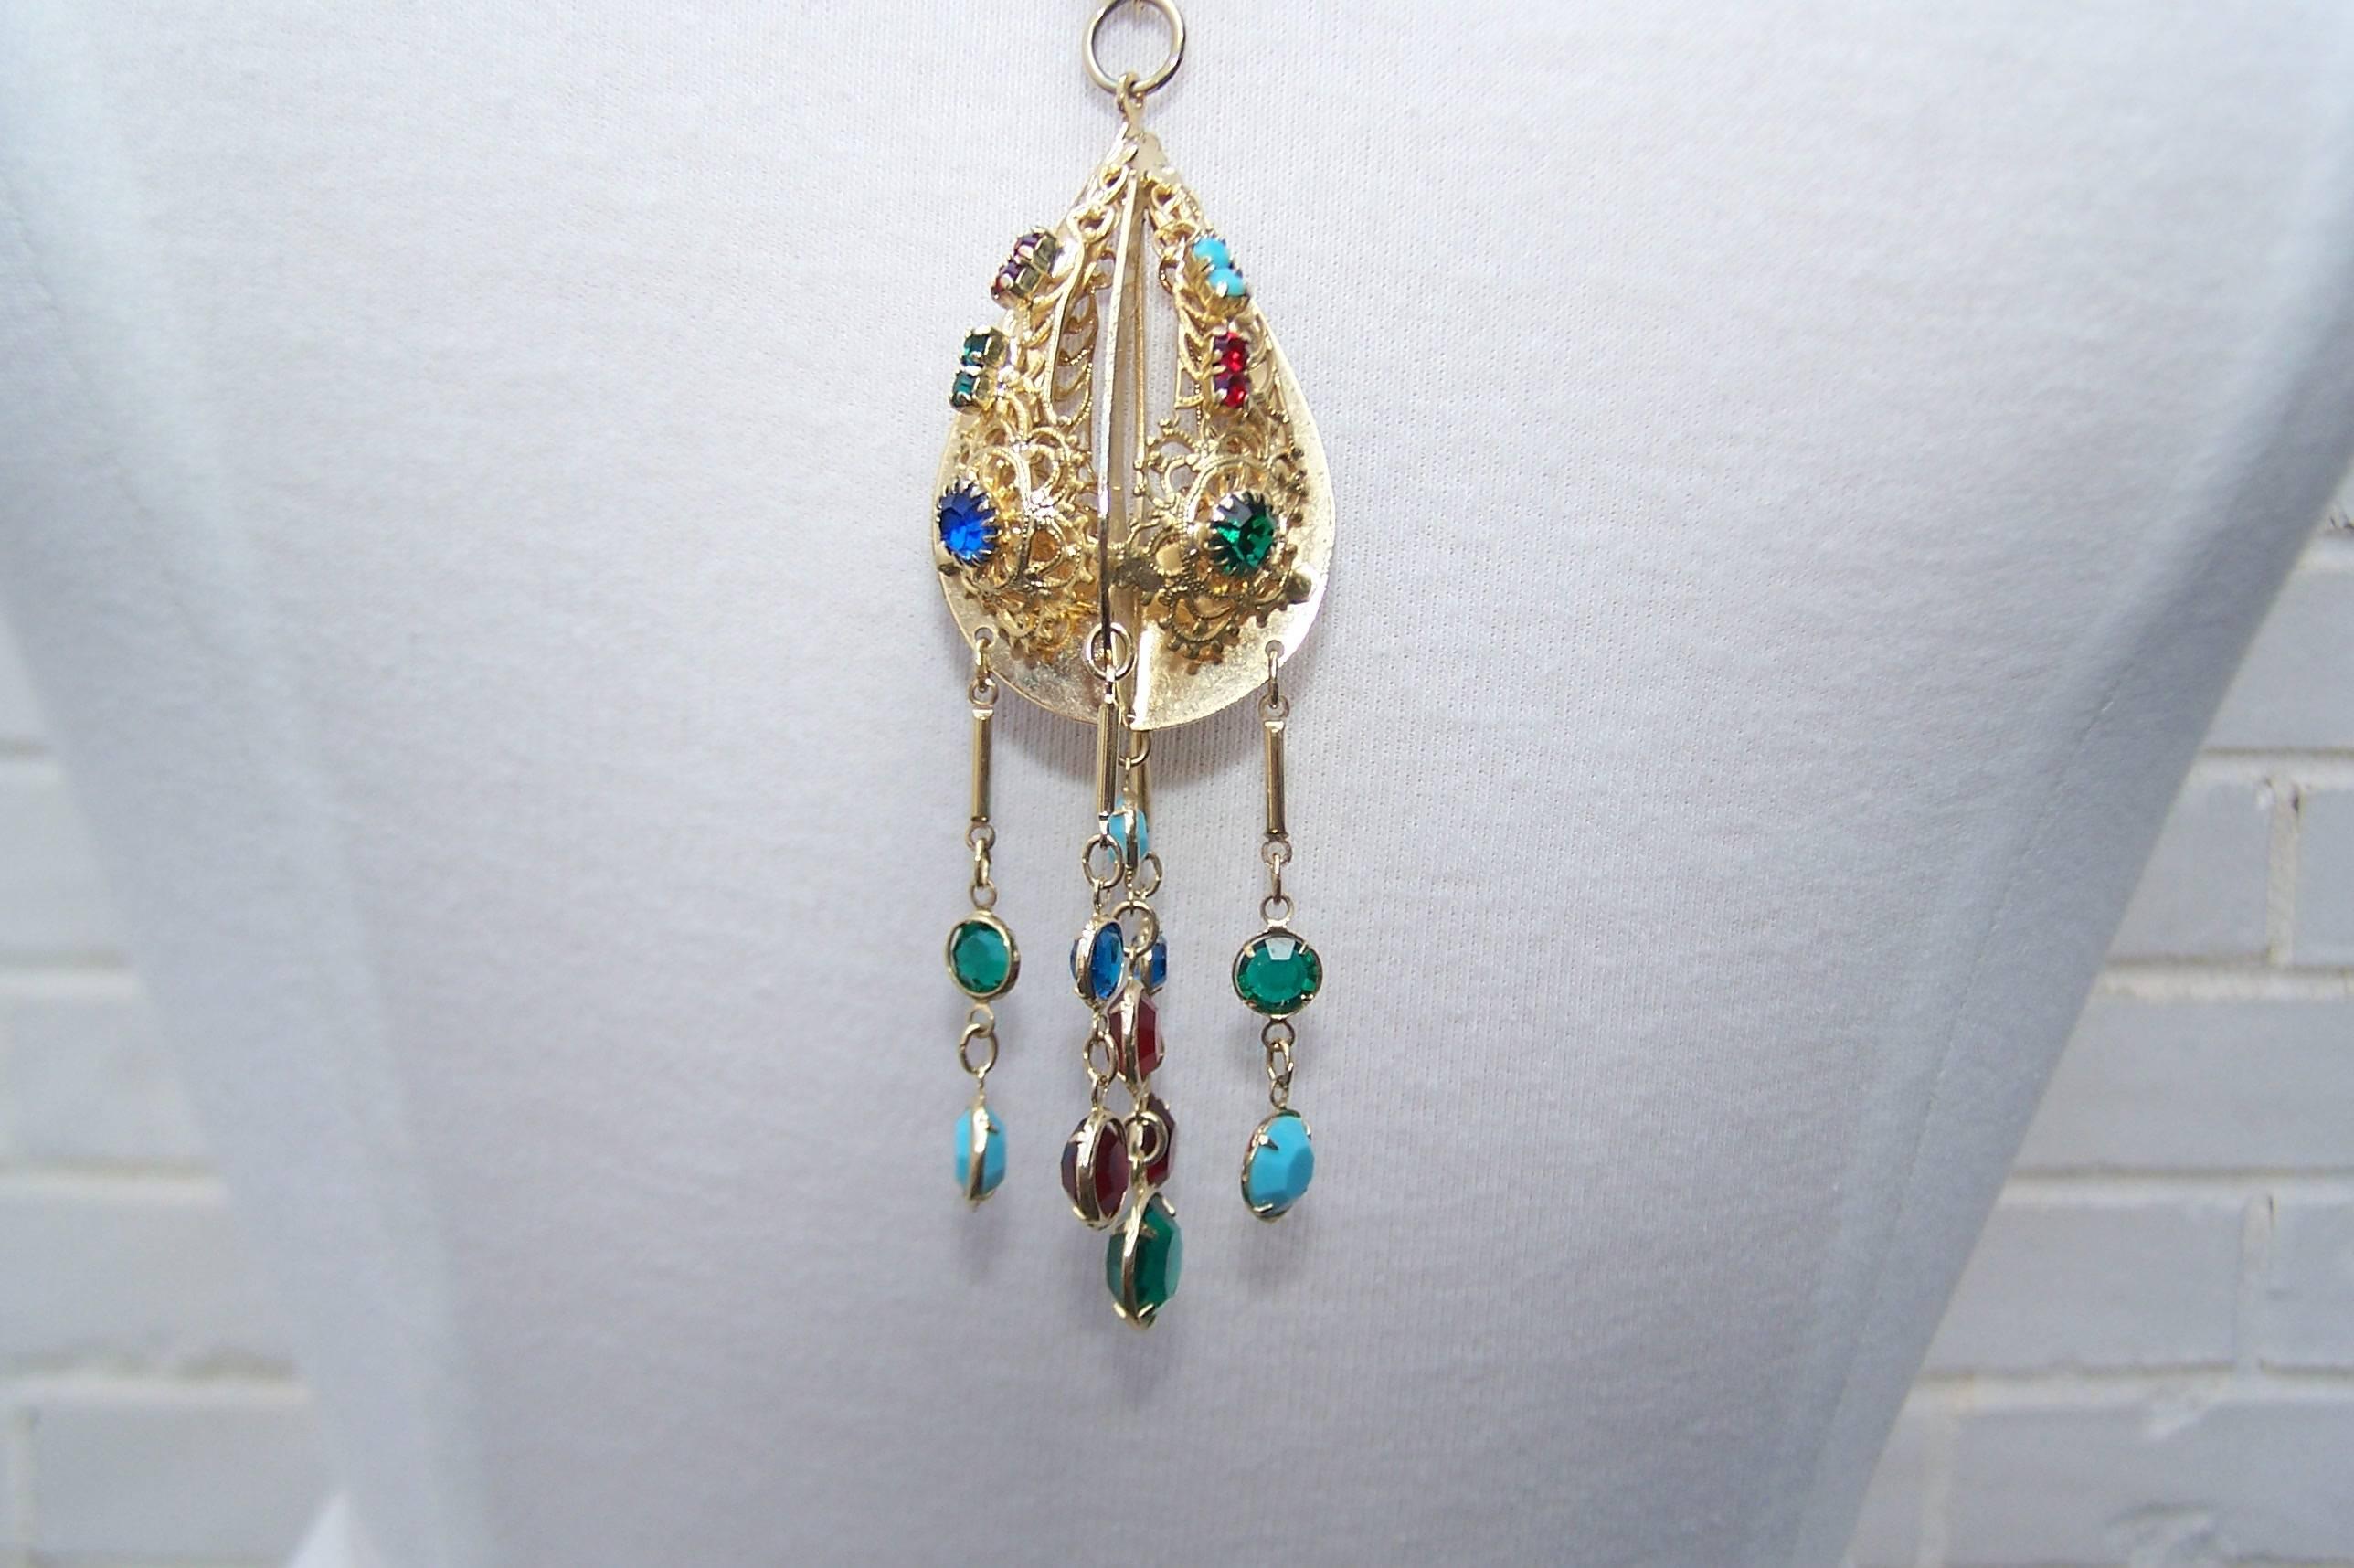 Women's Colorful C.1970 Bejeweled Pendant with Gold Metal Rope Chain